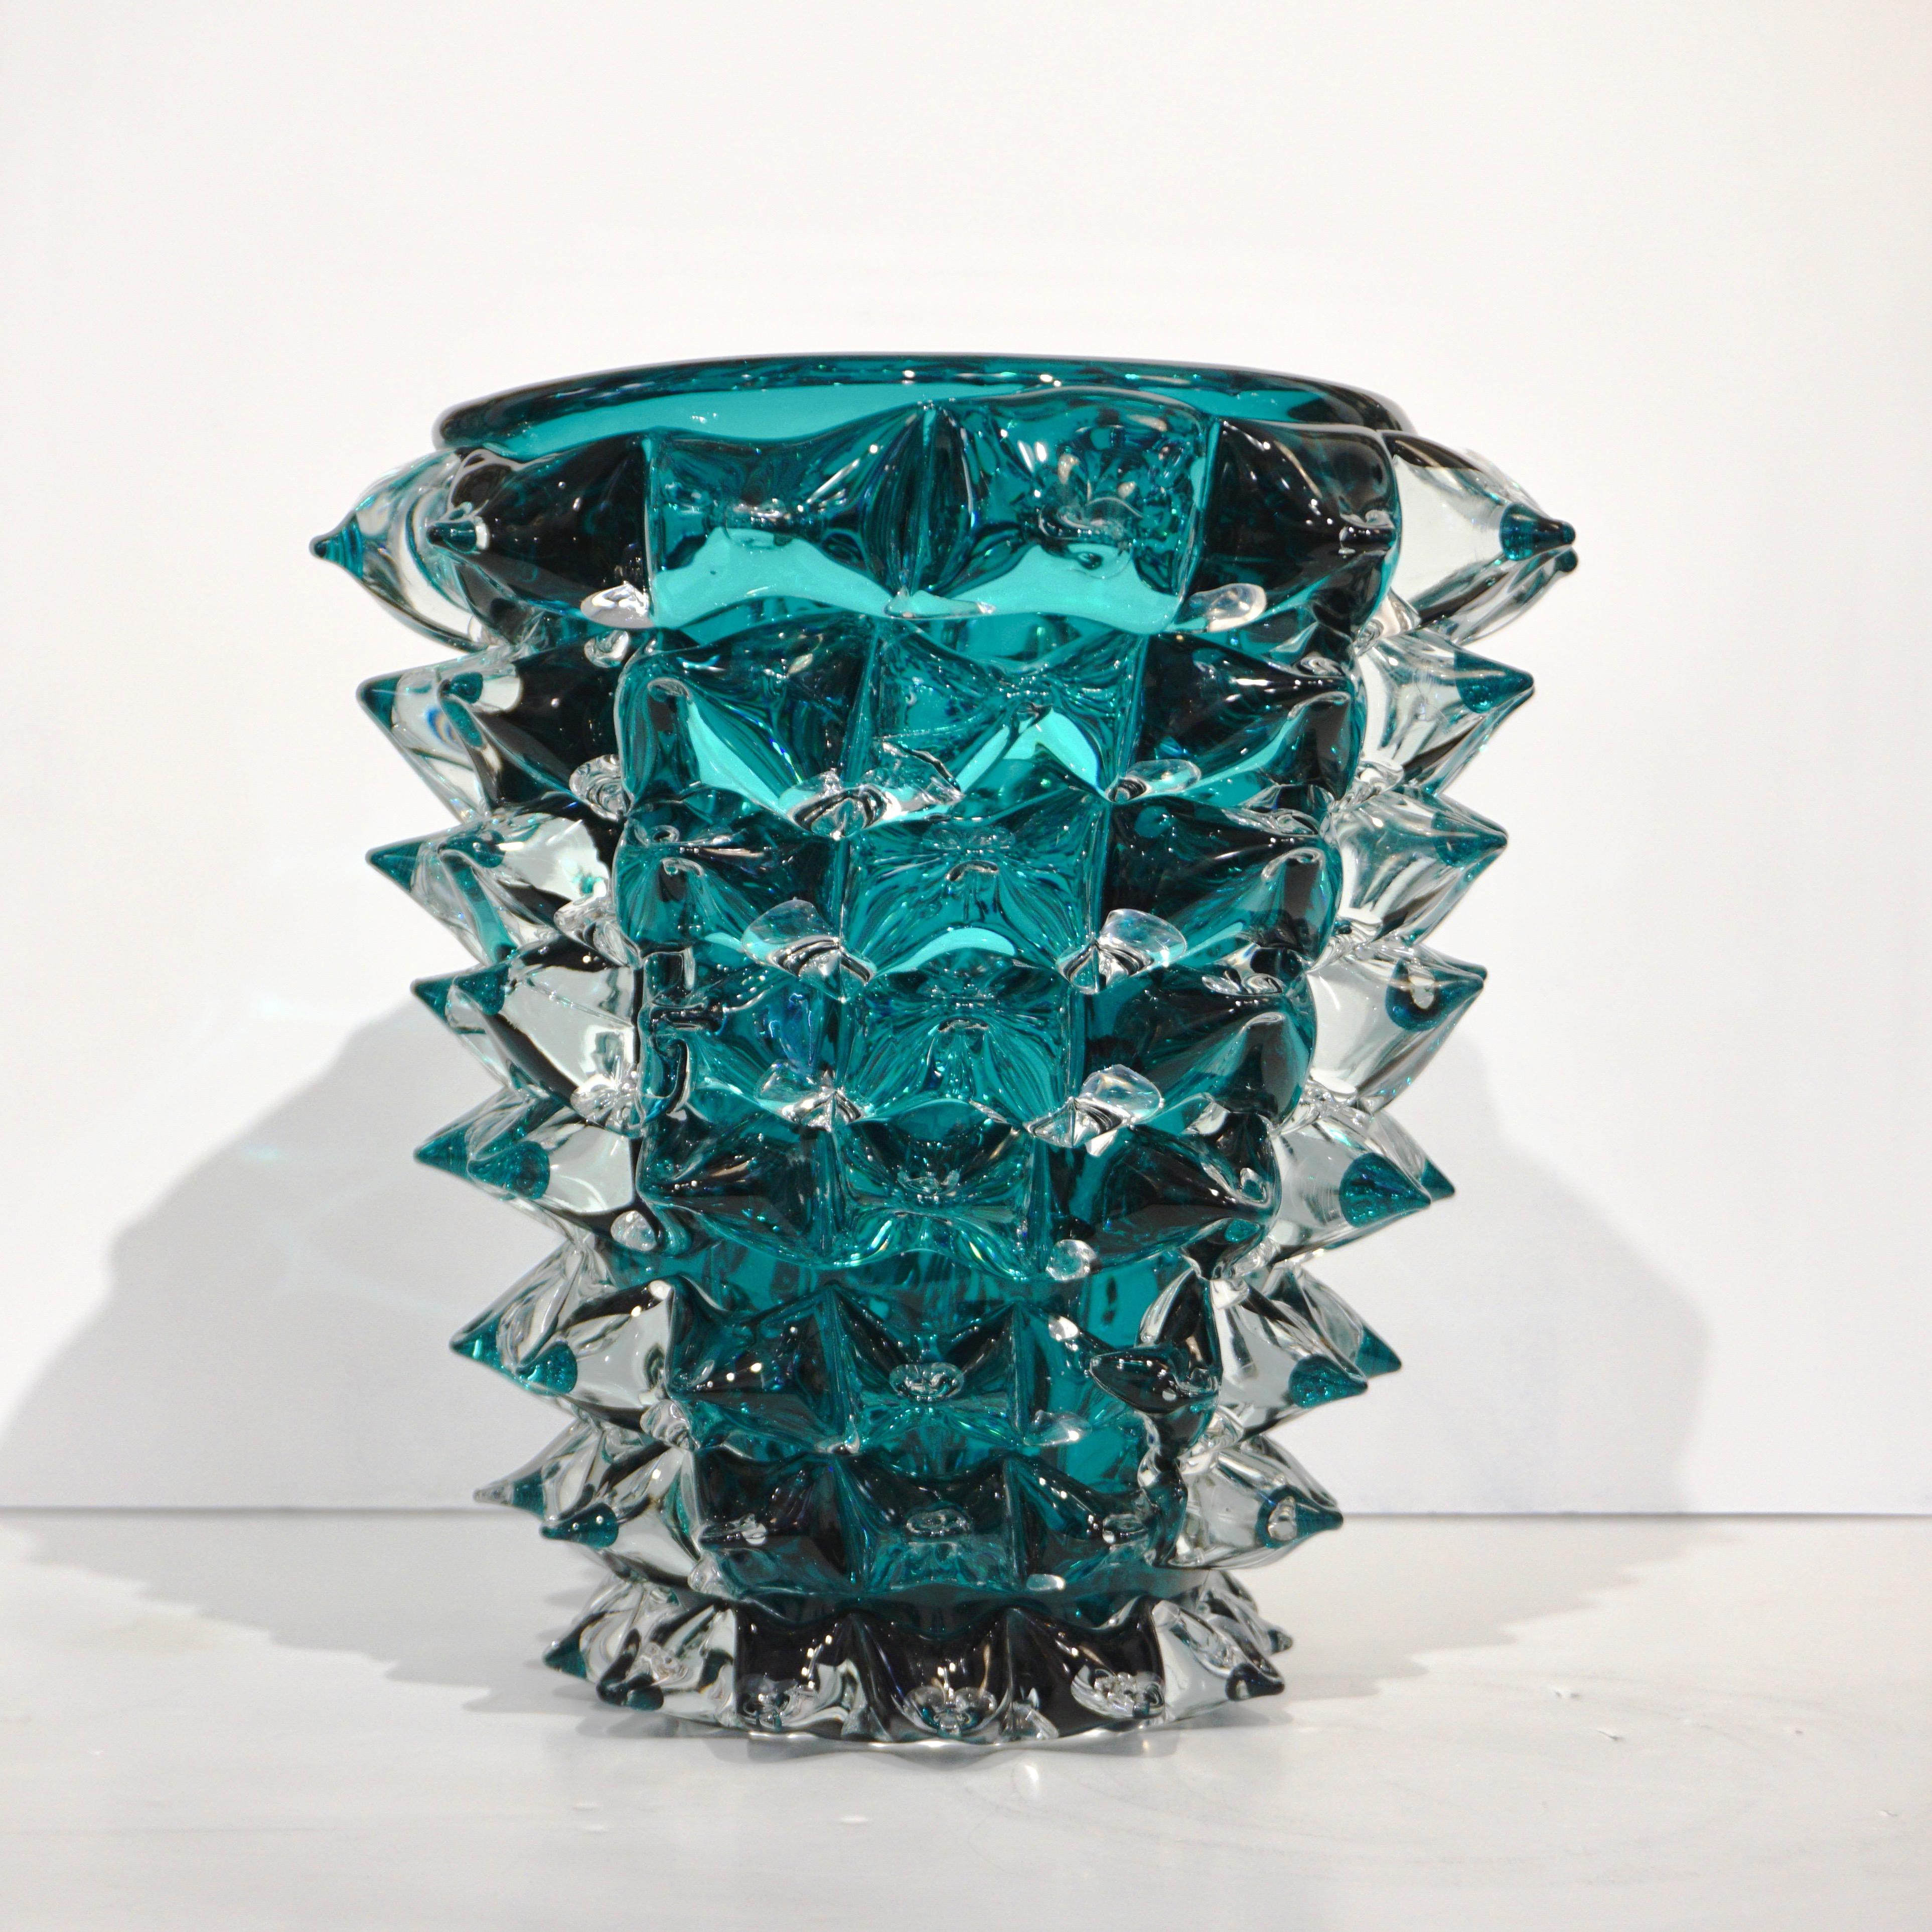 A very elegant and glowing 21st century Italian vase by Sergio Costantini, handcrafted modern sculpture in teal aqua blue-green Murano glass overlaid in crystal clear and decorated with the high skilled rostrato technique to produce a spike design.